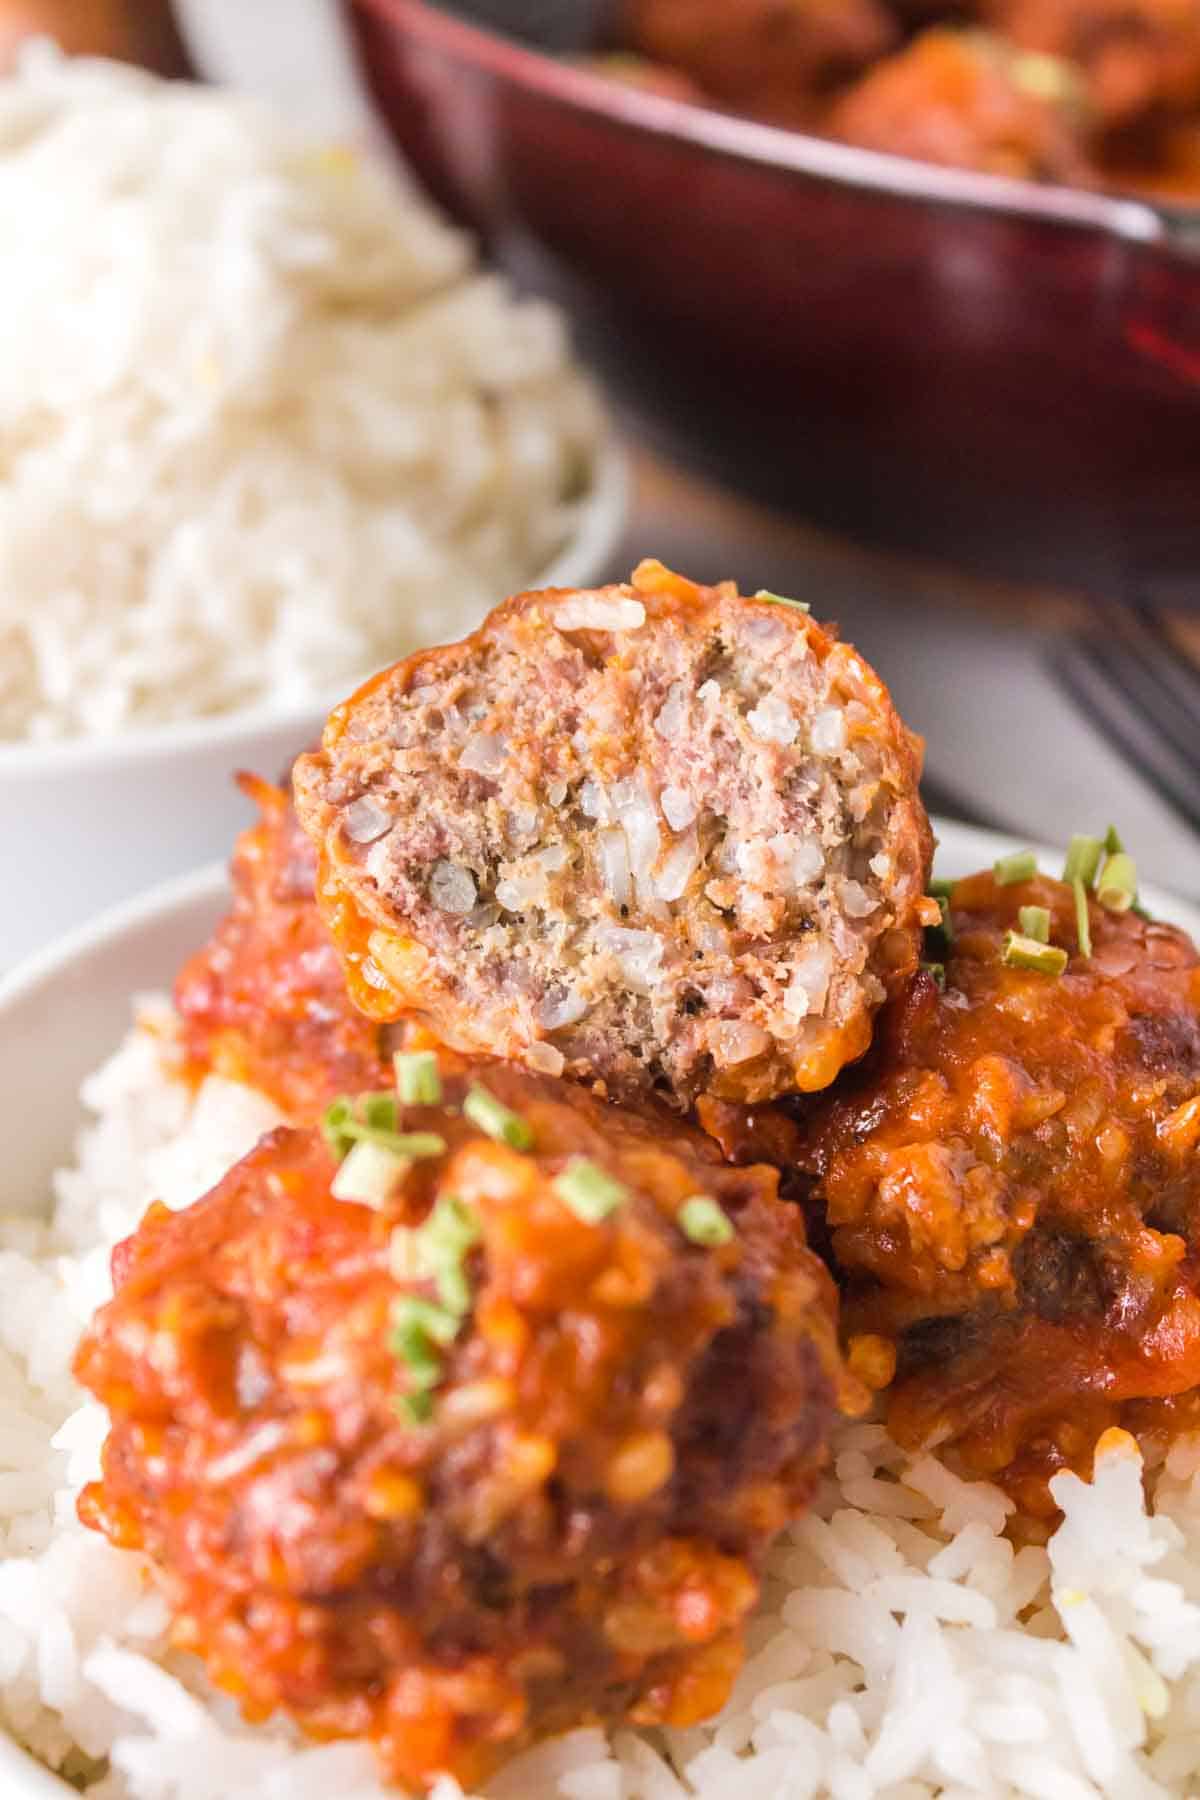 Porcupine meatballs on top of rice.